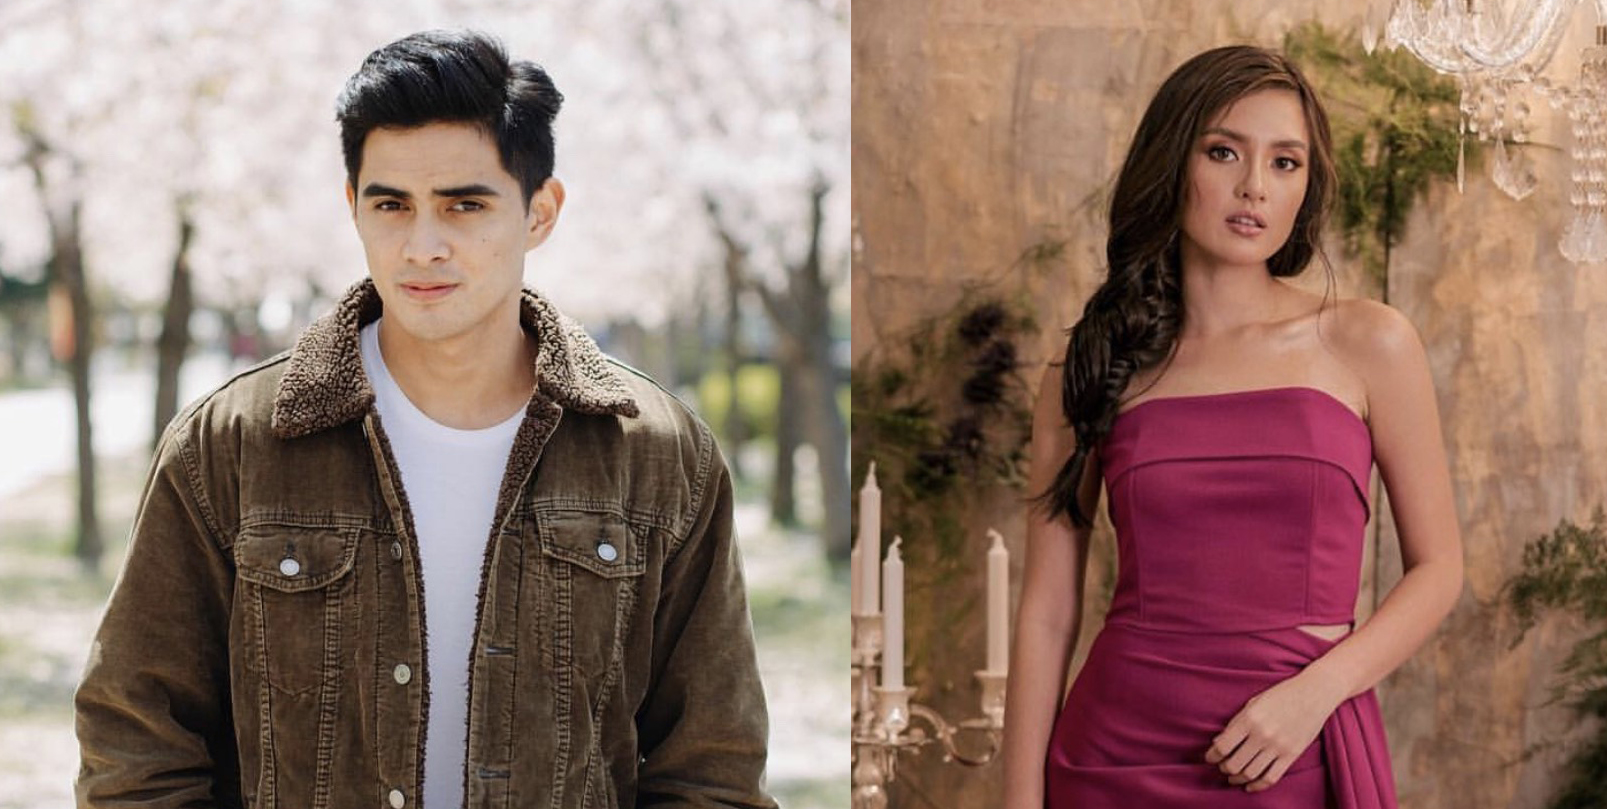 Juancho Trivino and Arra San Agustin will man the red carpet for pre-event interviews with guests and nominees.